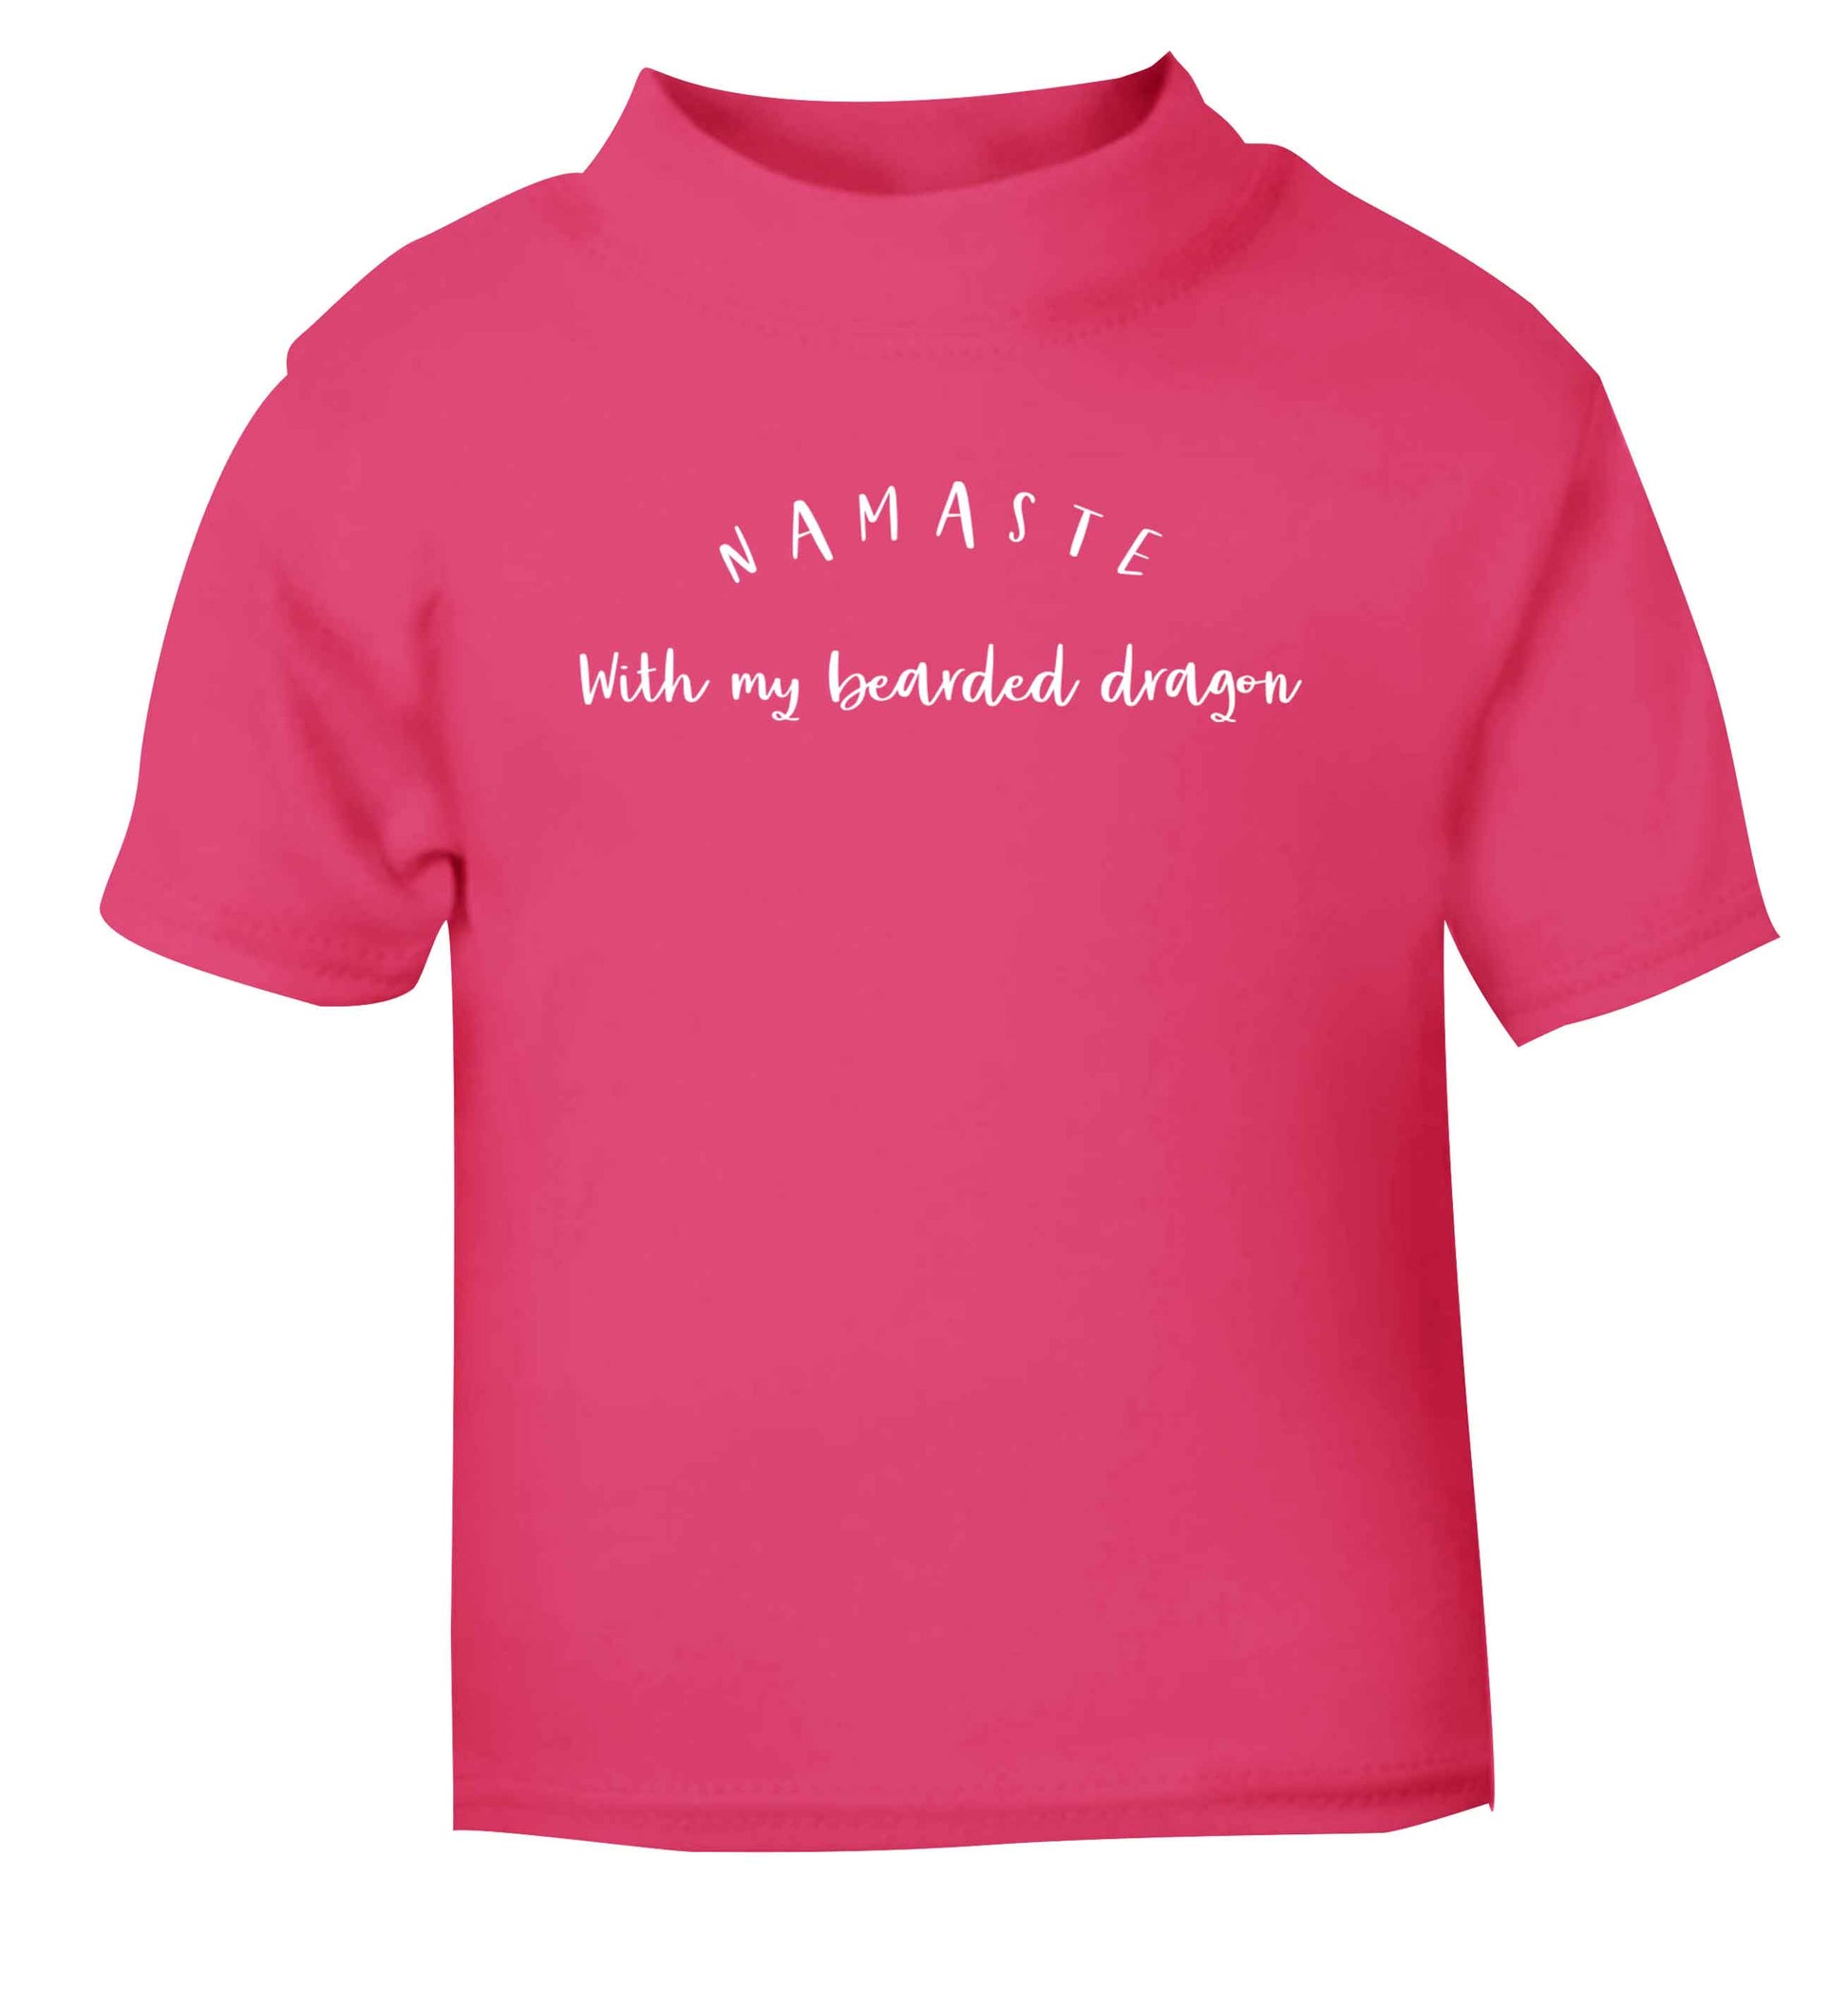 Namaste with my bearded dragon pink Baby Toddler Tshirt 2 Years